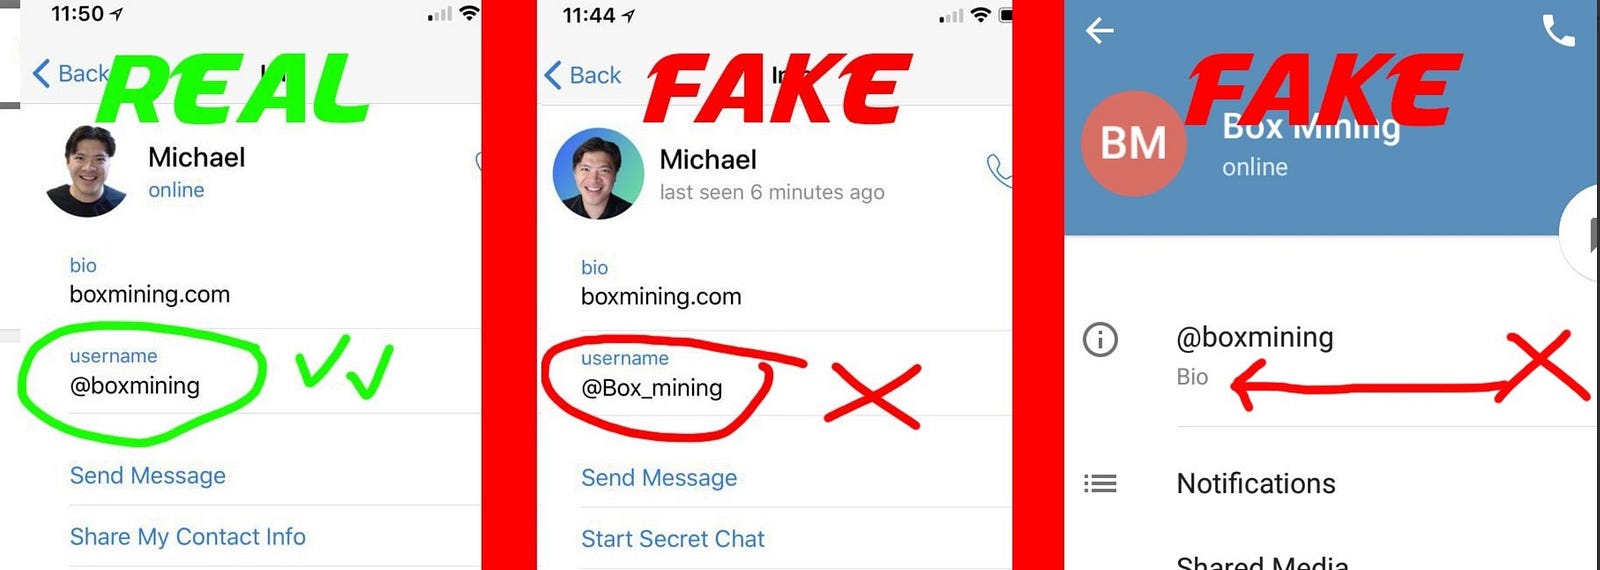 Buxgg Fake Tomwhite2010 Com - how to get free robux redeem code 2019 how to use bux gg on roblox